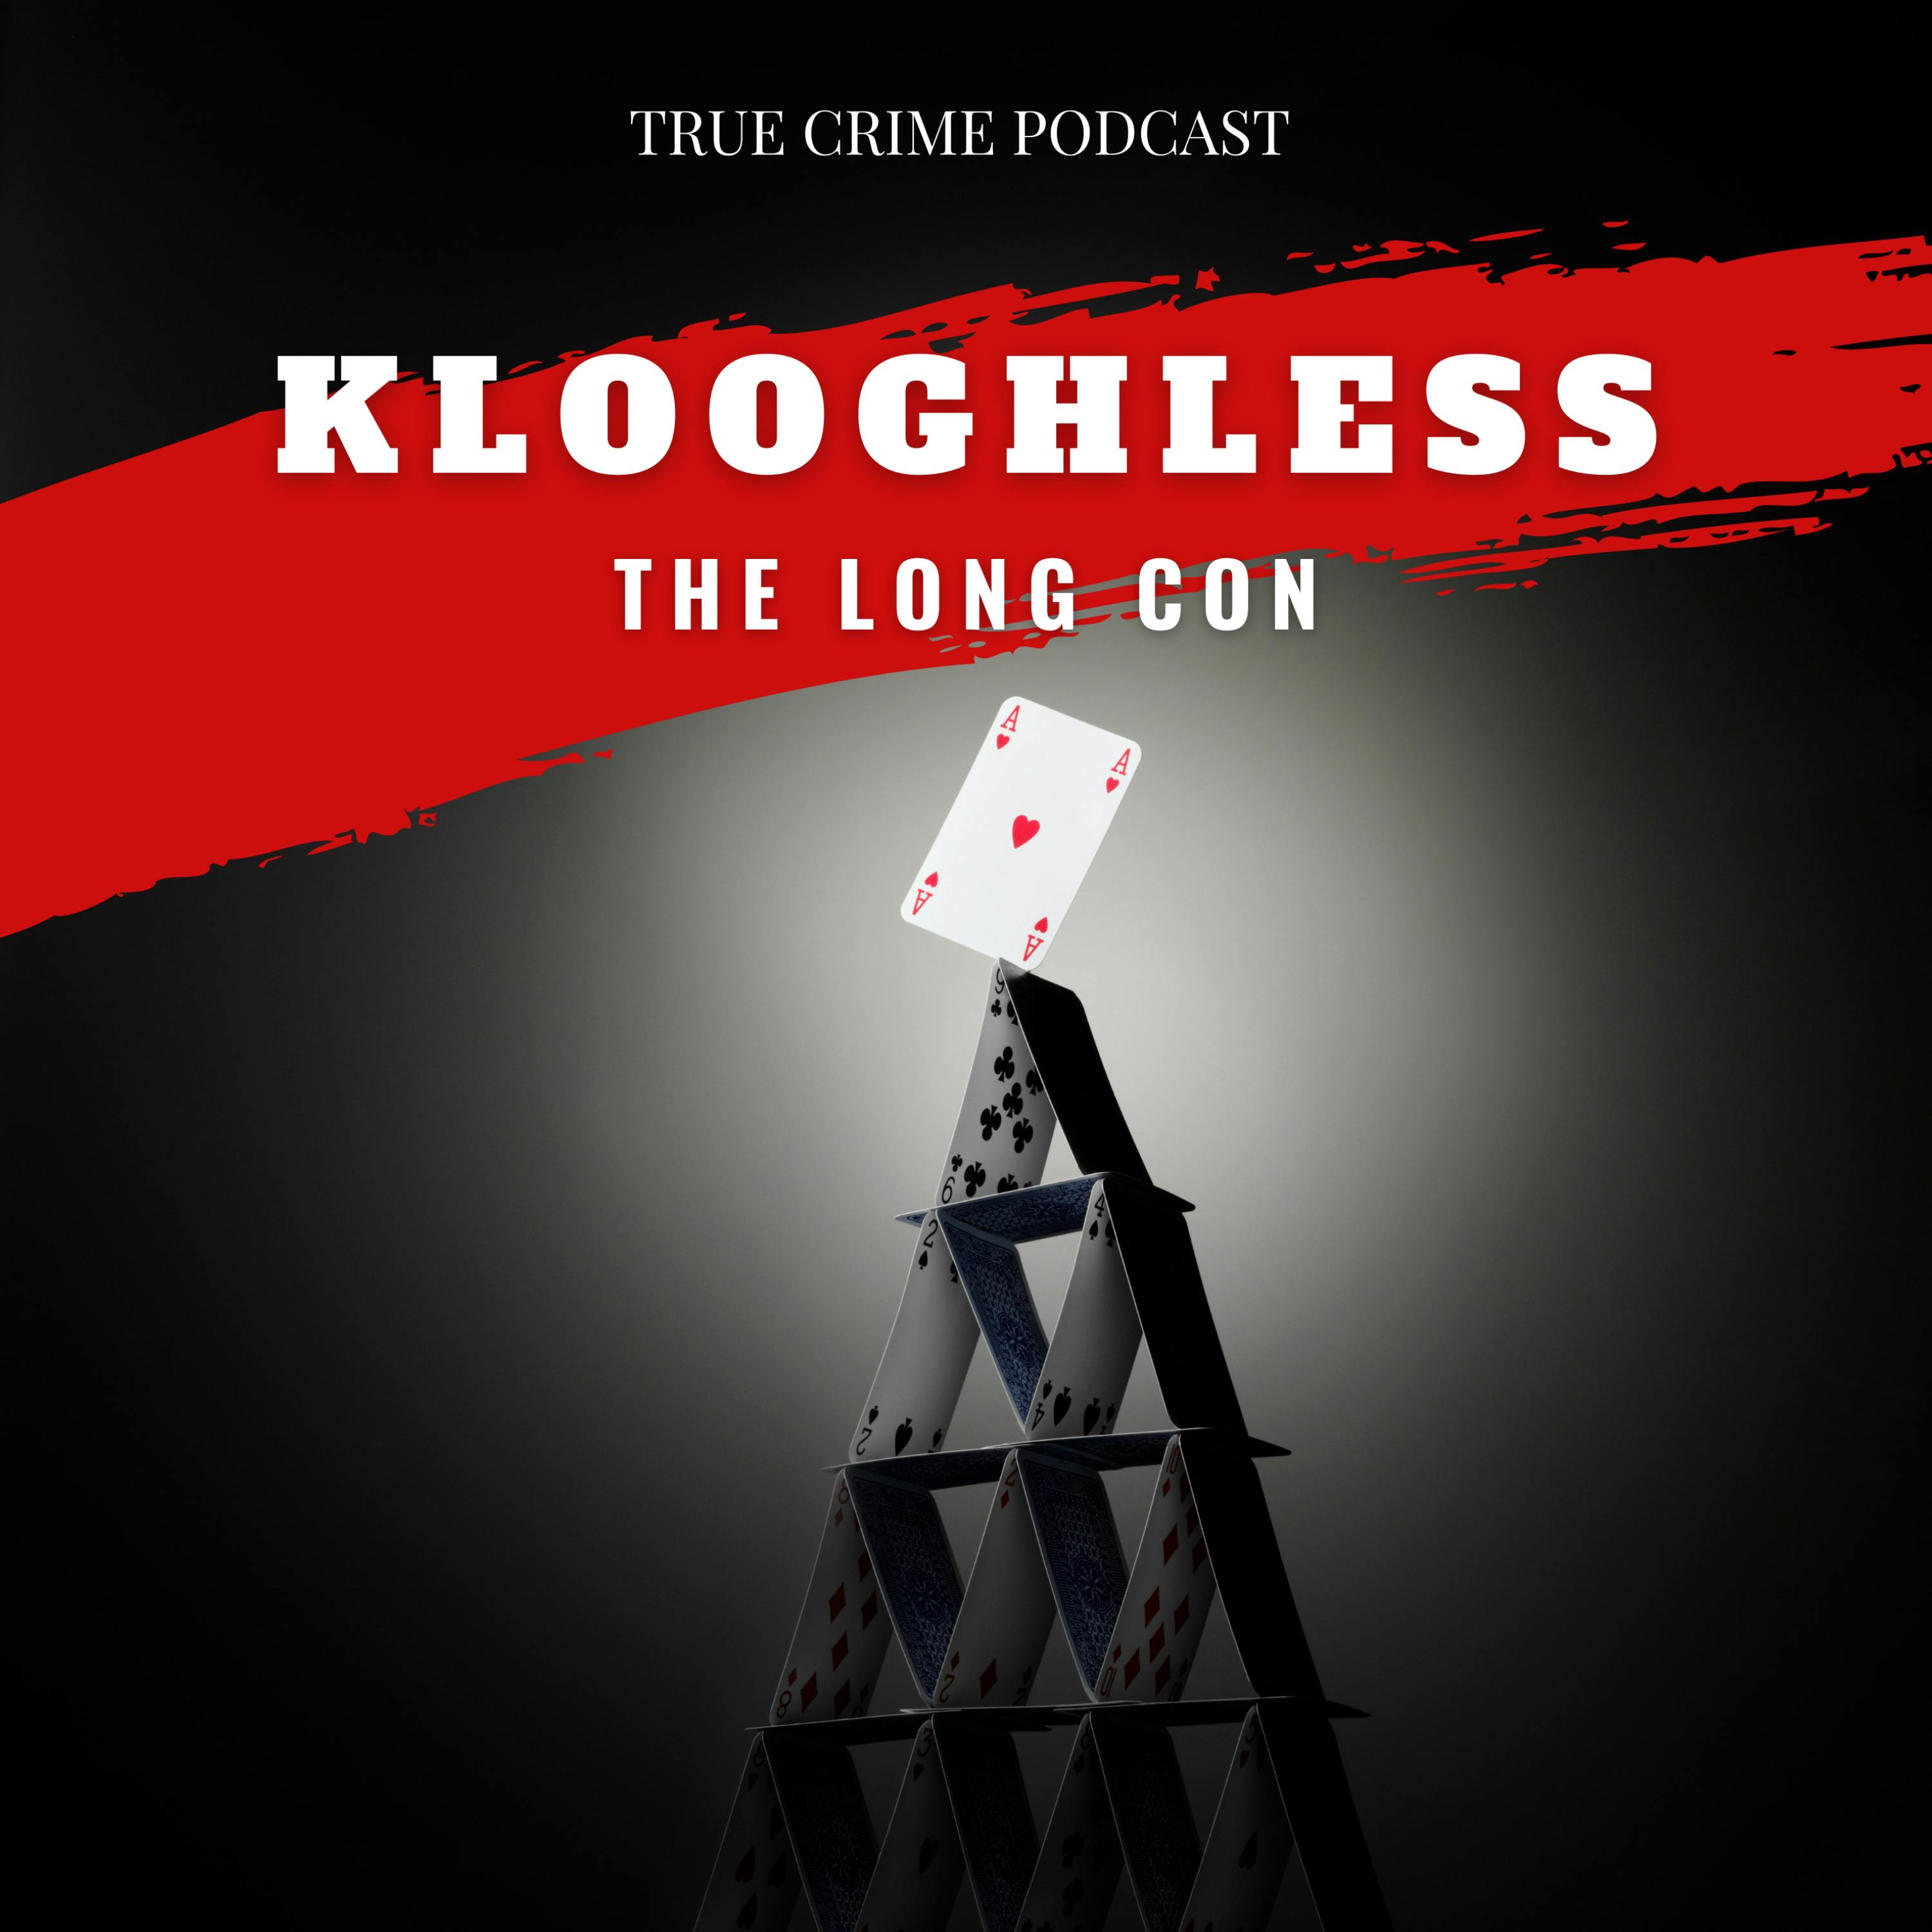 INTRODUCING KLOOGHLESS - The Long CON